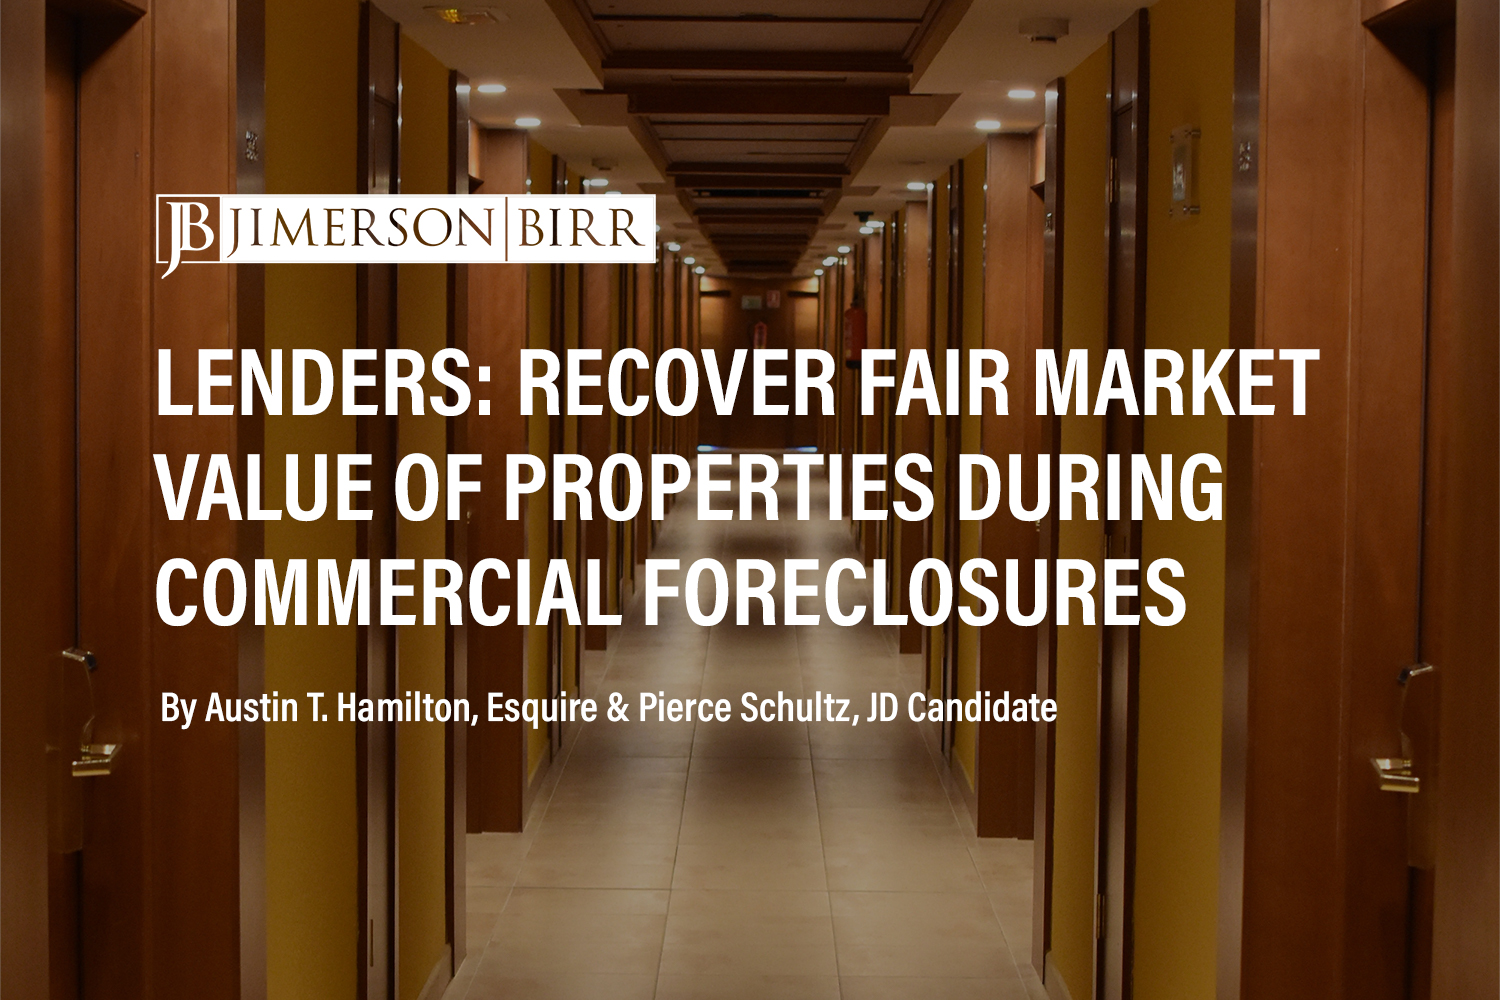 Mitigating Risks Associated with Hotel, Restaurant and Entertainment Industry Economic Challenges: Part 5 – Commercial Foreclosures 101